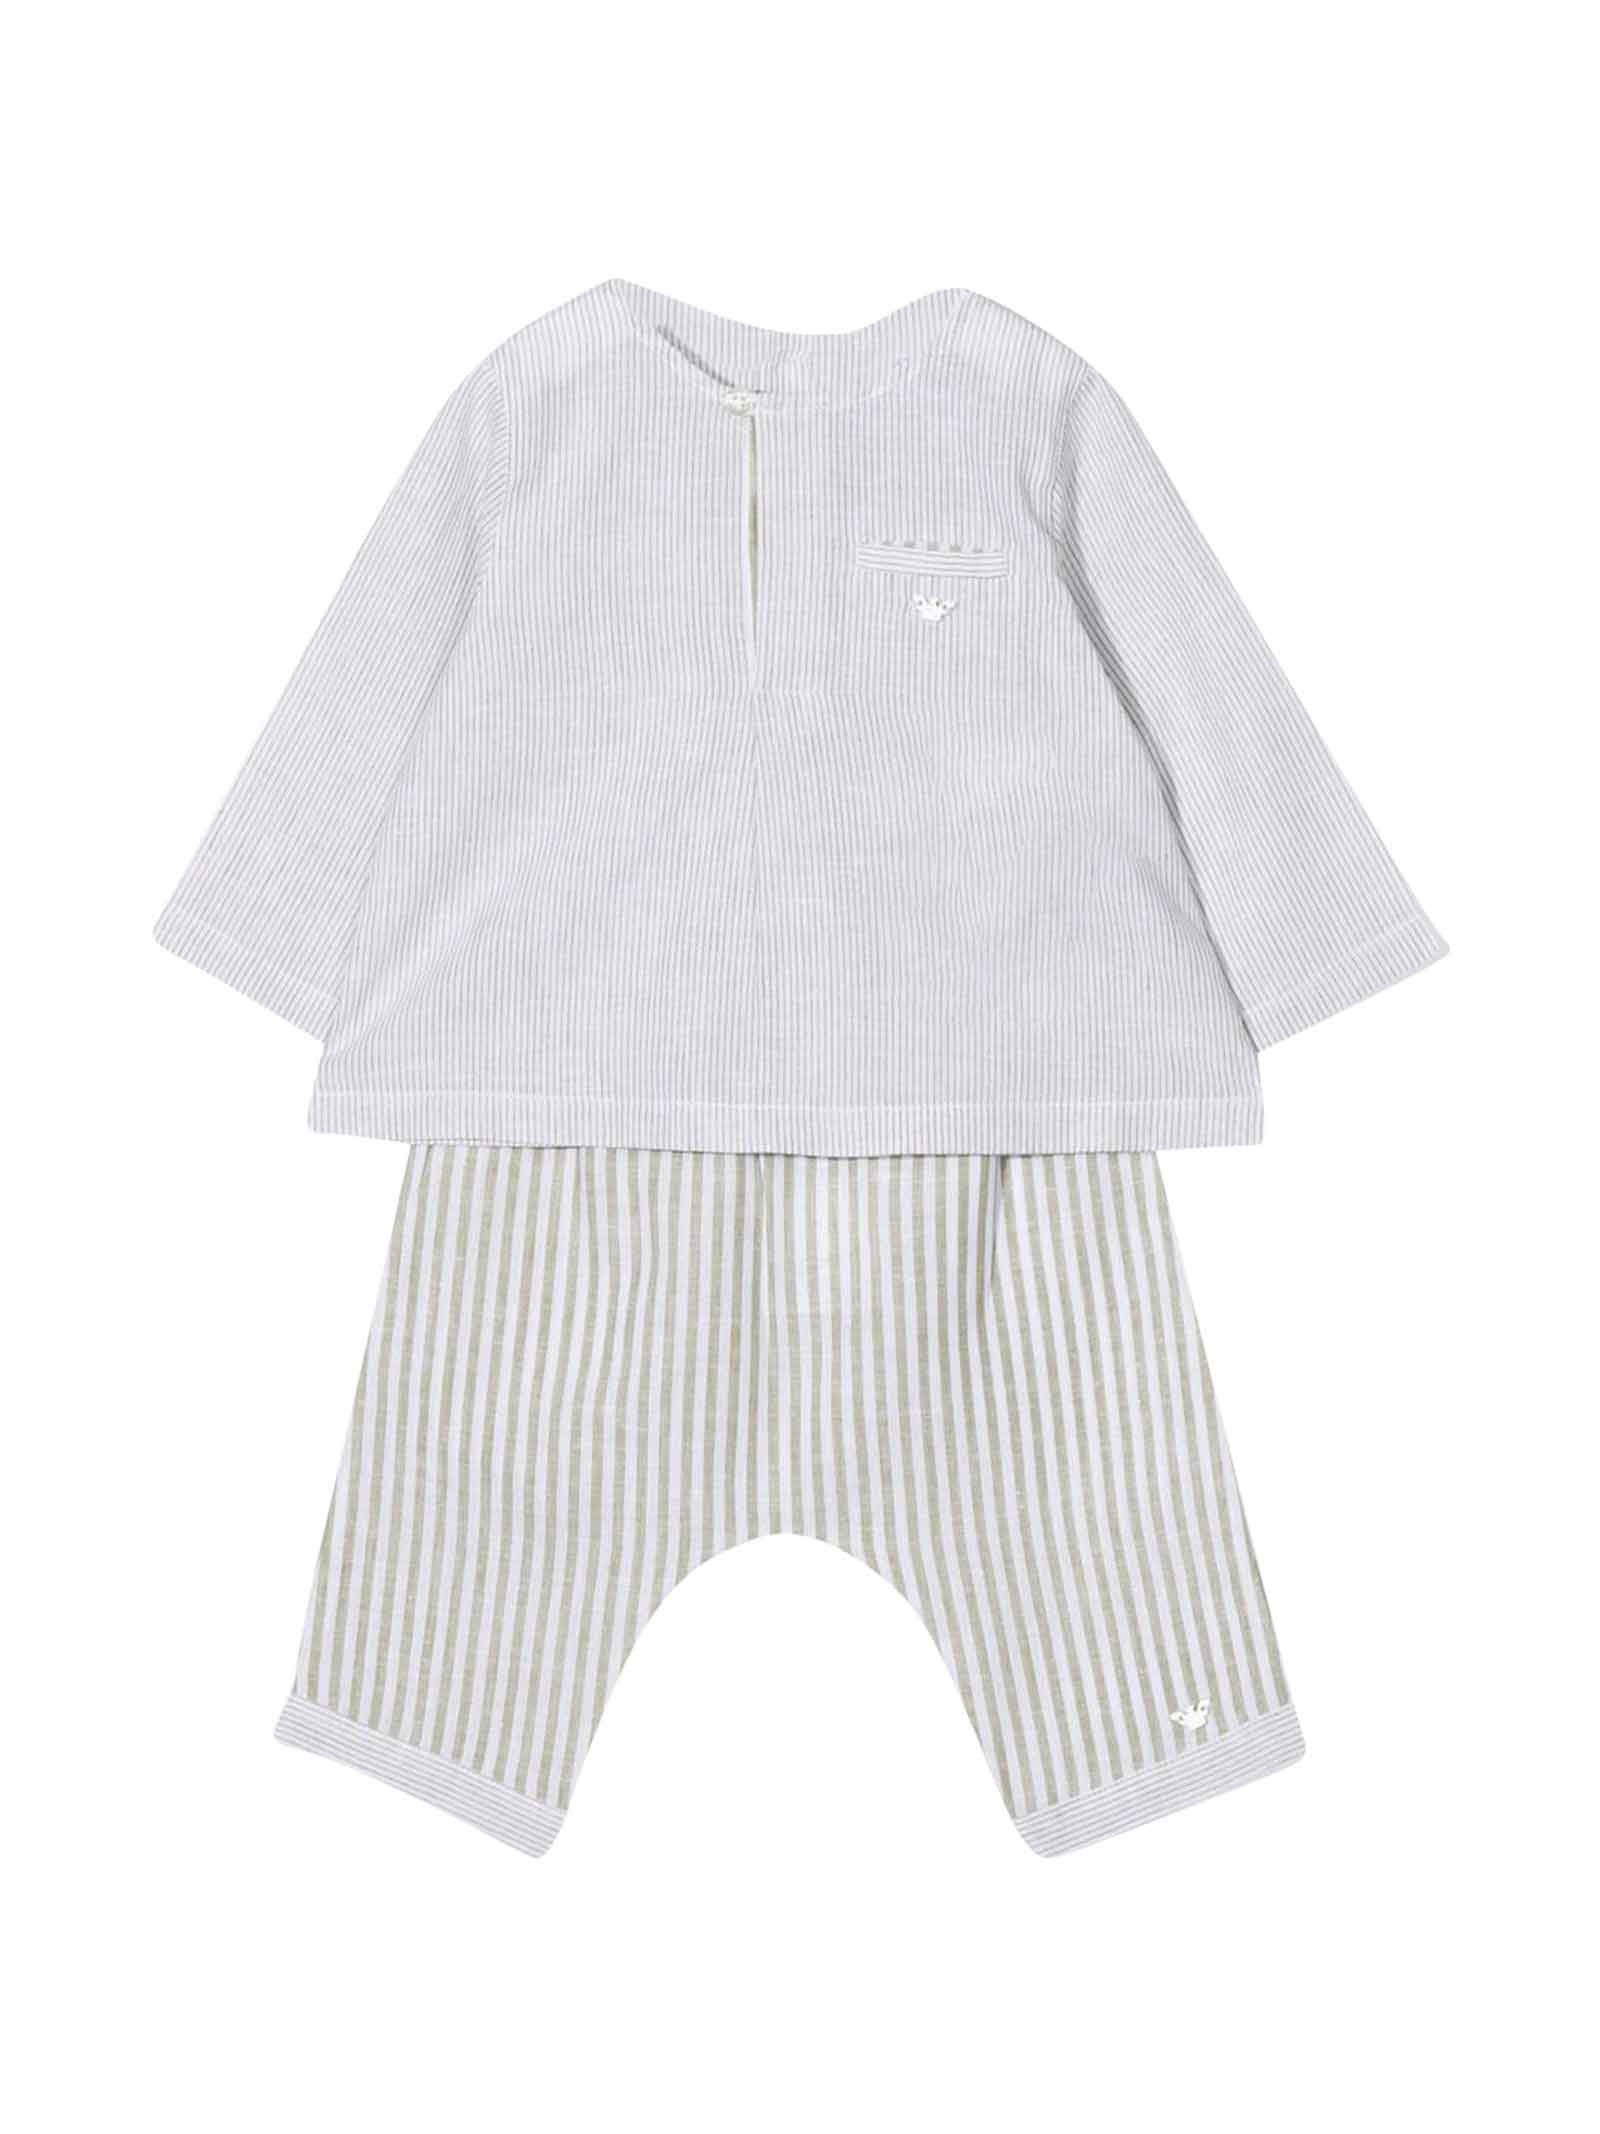 Emporio Armani Two-piece Striped Baby Green Suit